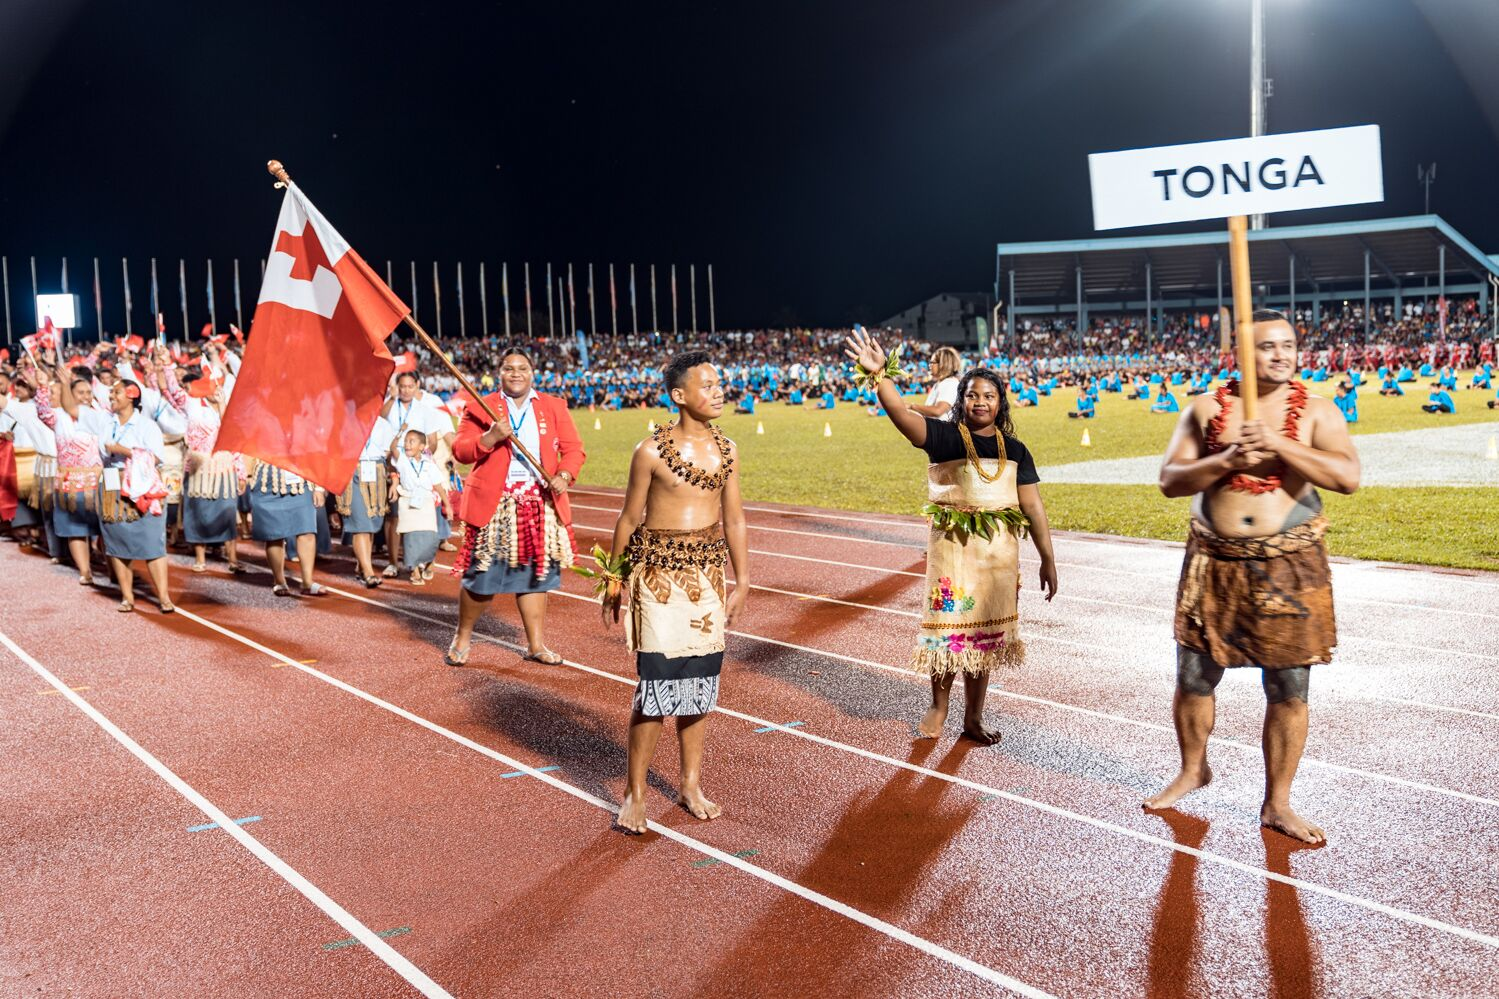 Tonga have expressed interest in hosting the 2027 Pacific Games ©Samoa 2019